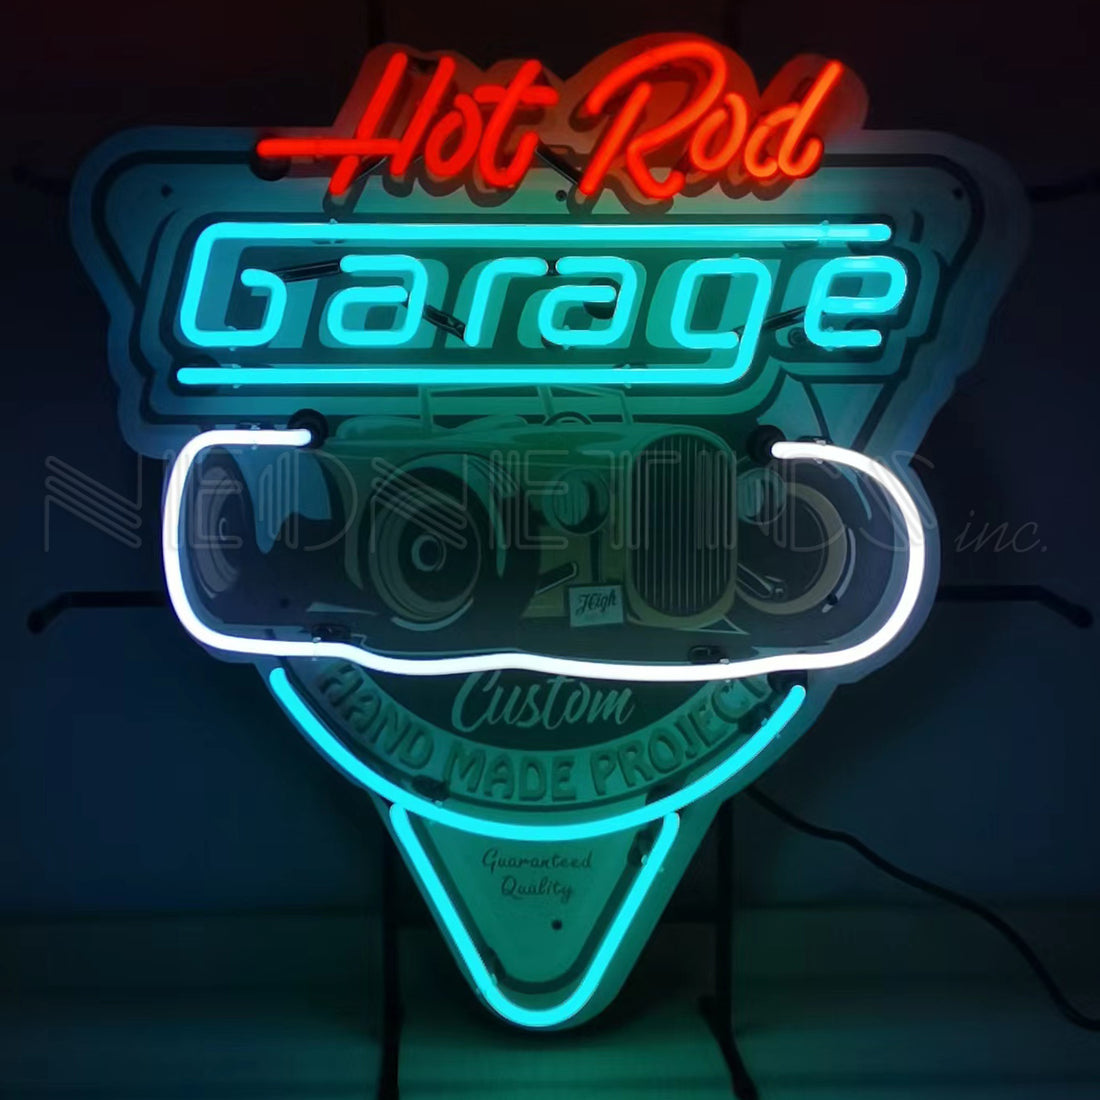 Hot Rod Garage Teal with Backing Neon Sign